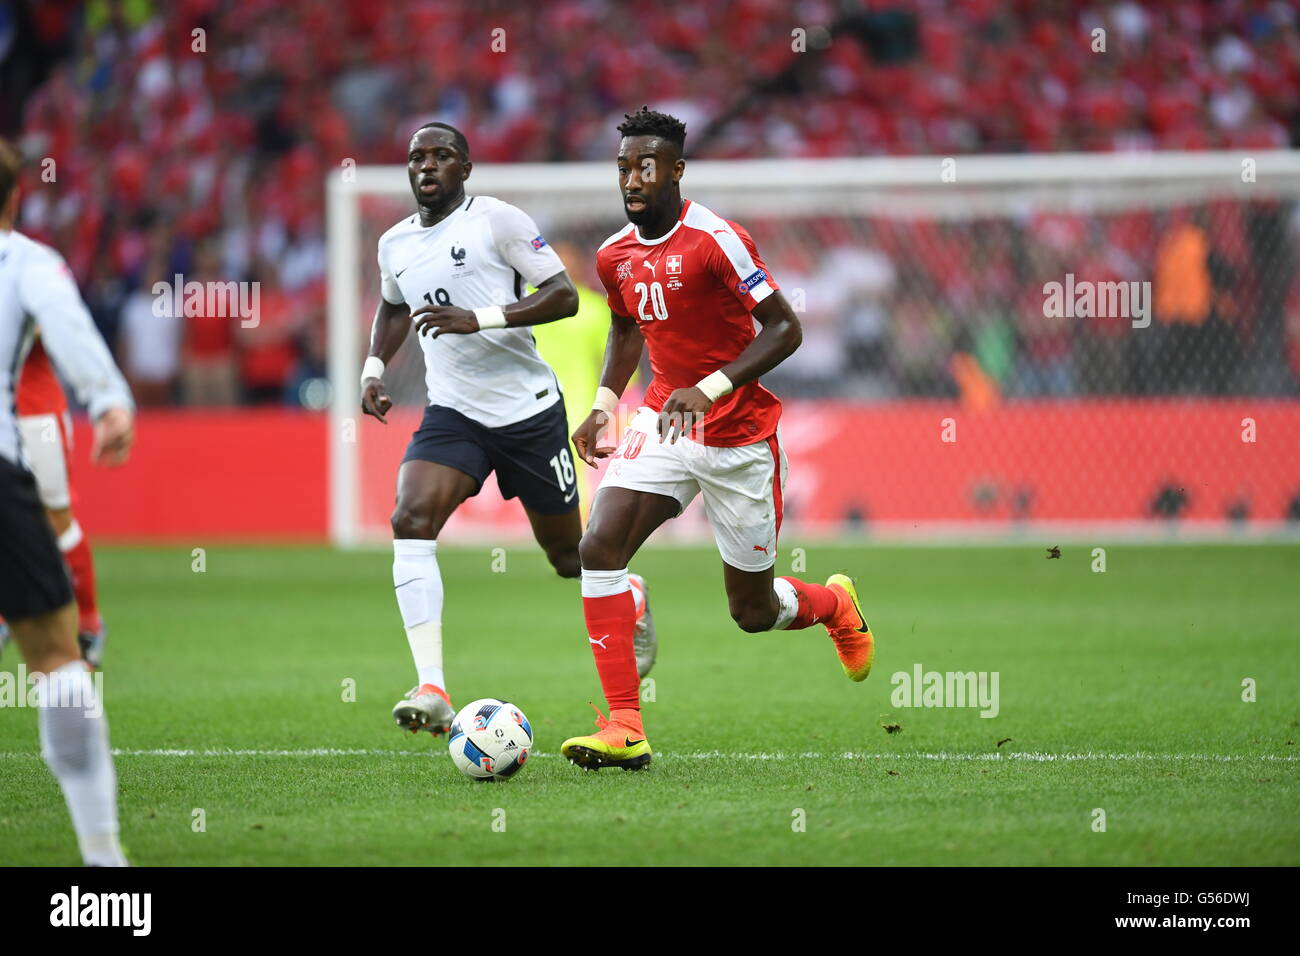 Lille, France. 19th June, 2016. Moussa Sissoko (l) of France and Johan Djourou of Switzerland vie for the ball during the preliminary round match between Switzerland and France at Pierre Mauroy stadium in Lille, France, 19 June, 2016. Photo: Marius Becker/dpa/Alamy Live News Stock Photo